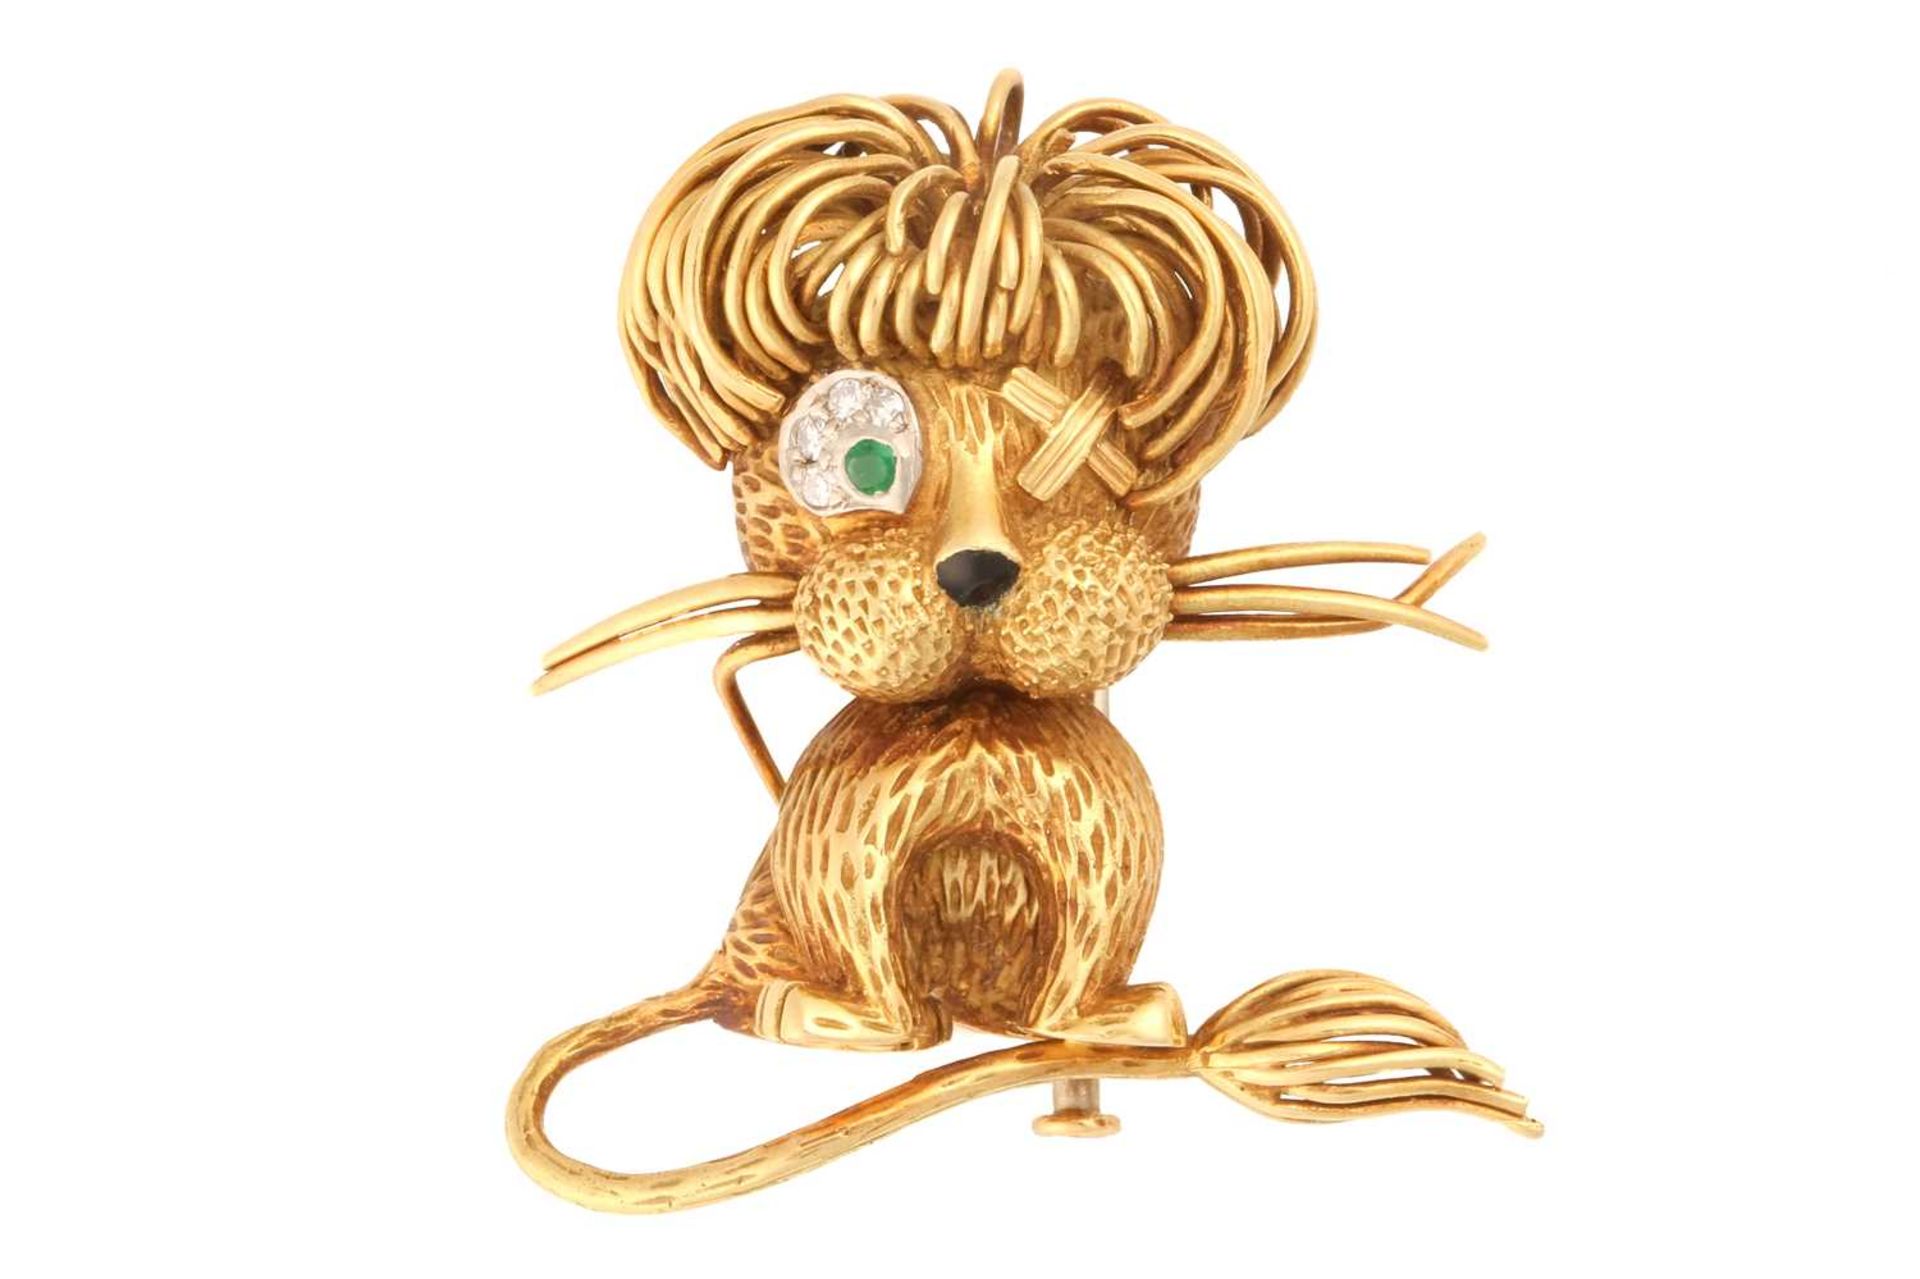 René Kern - a novelty 'Lion' brooch, the textured body adorned with wirework mane and whiskers, with